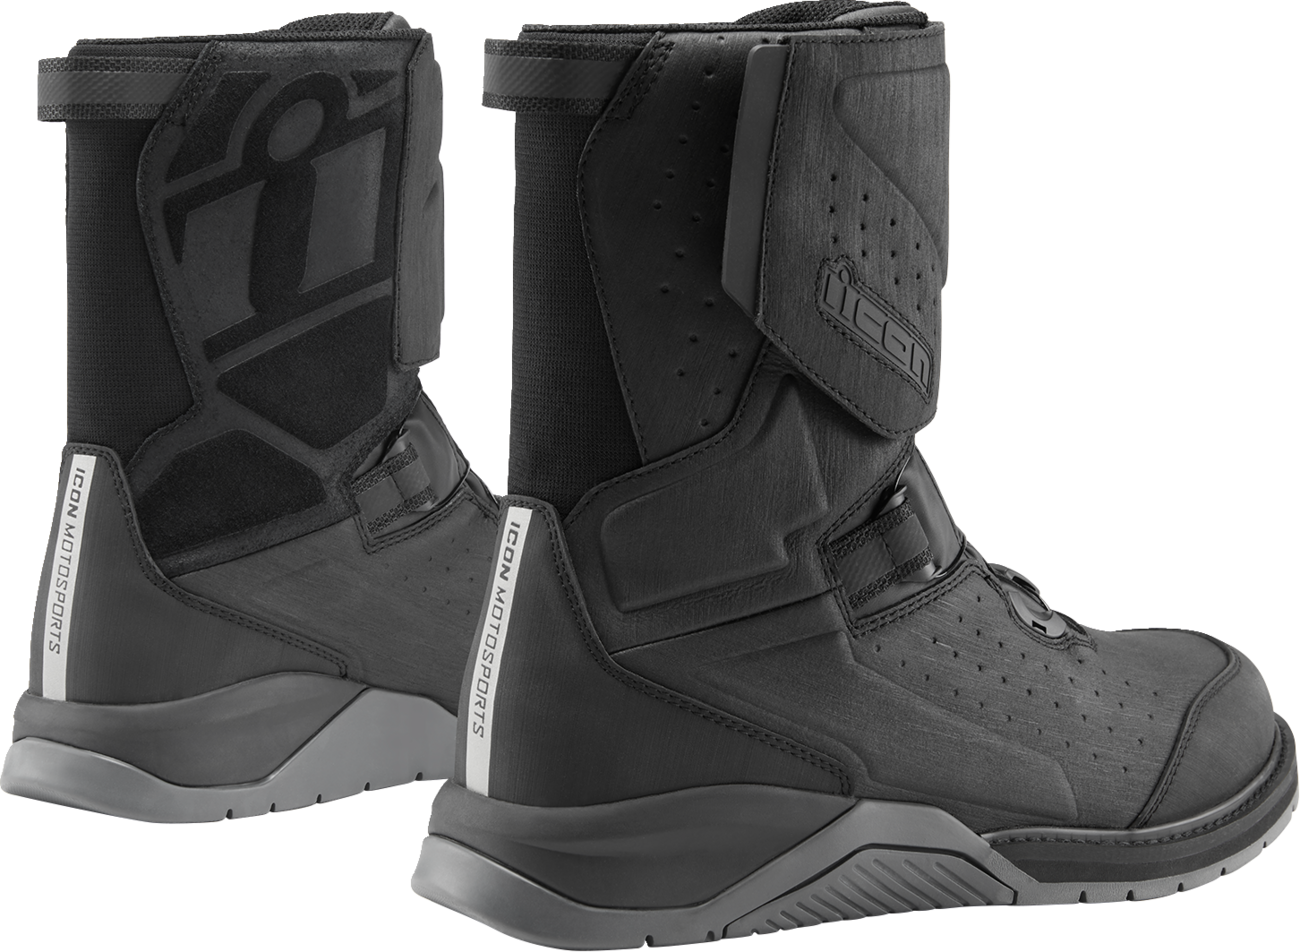 ICON Alcan Waterproof Boots - Black - Size 9 3403-1235